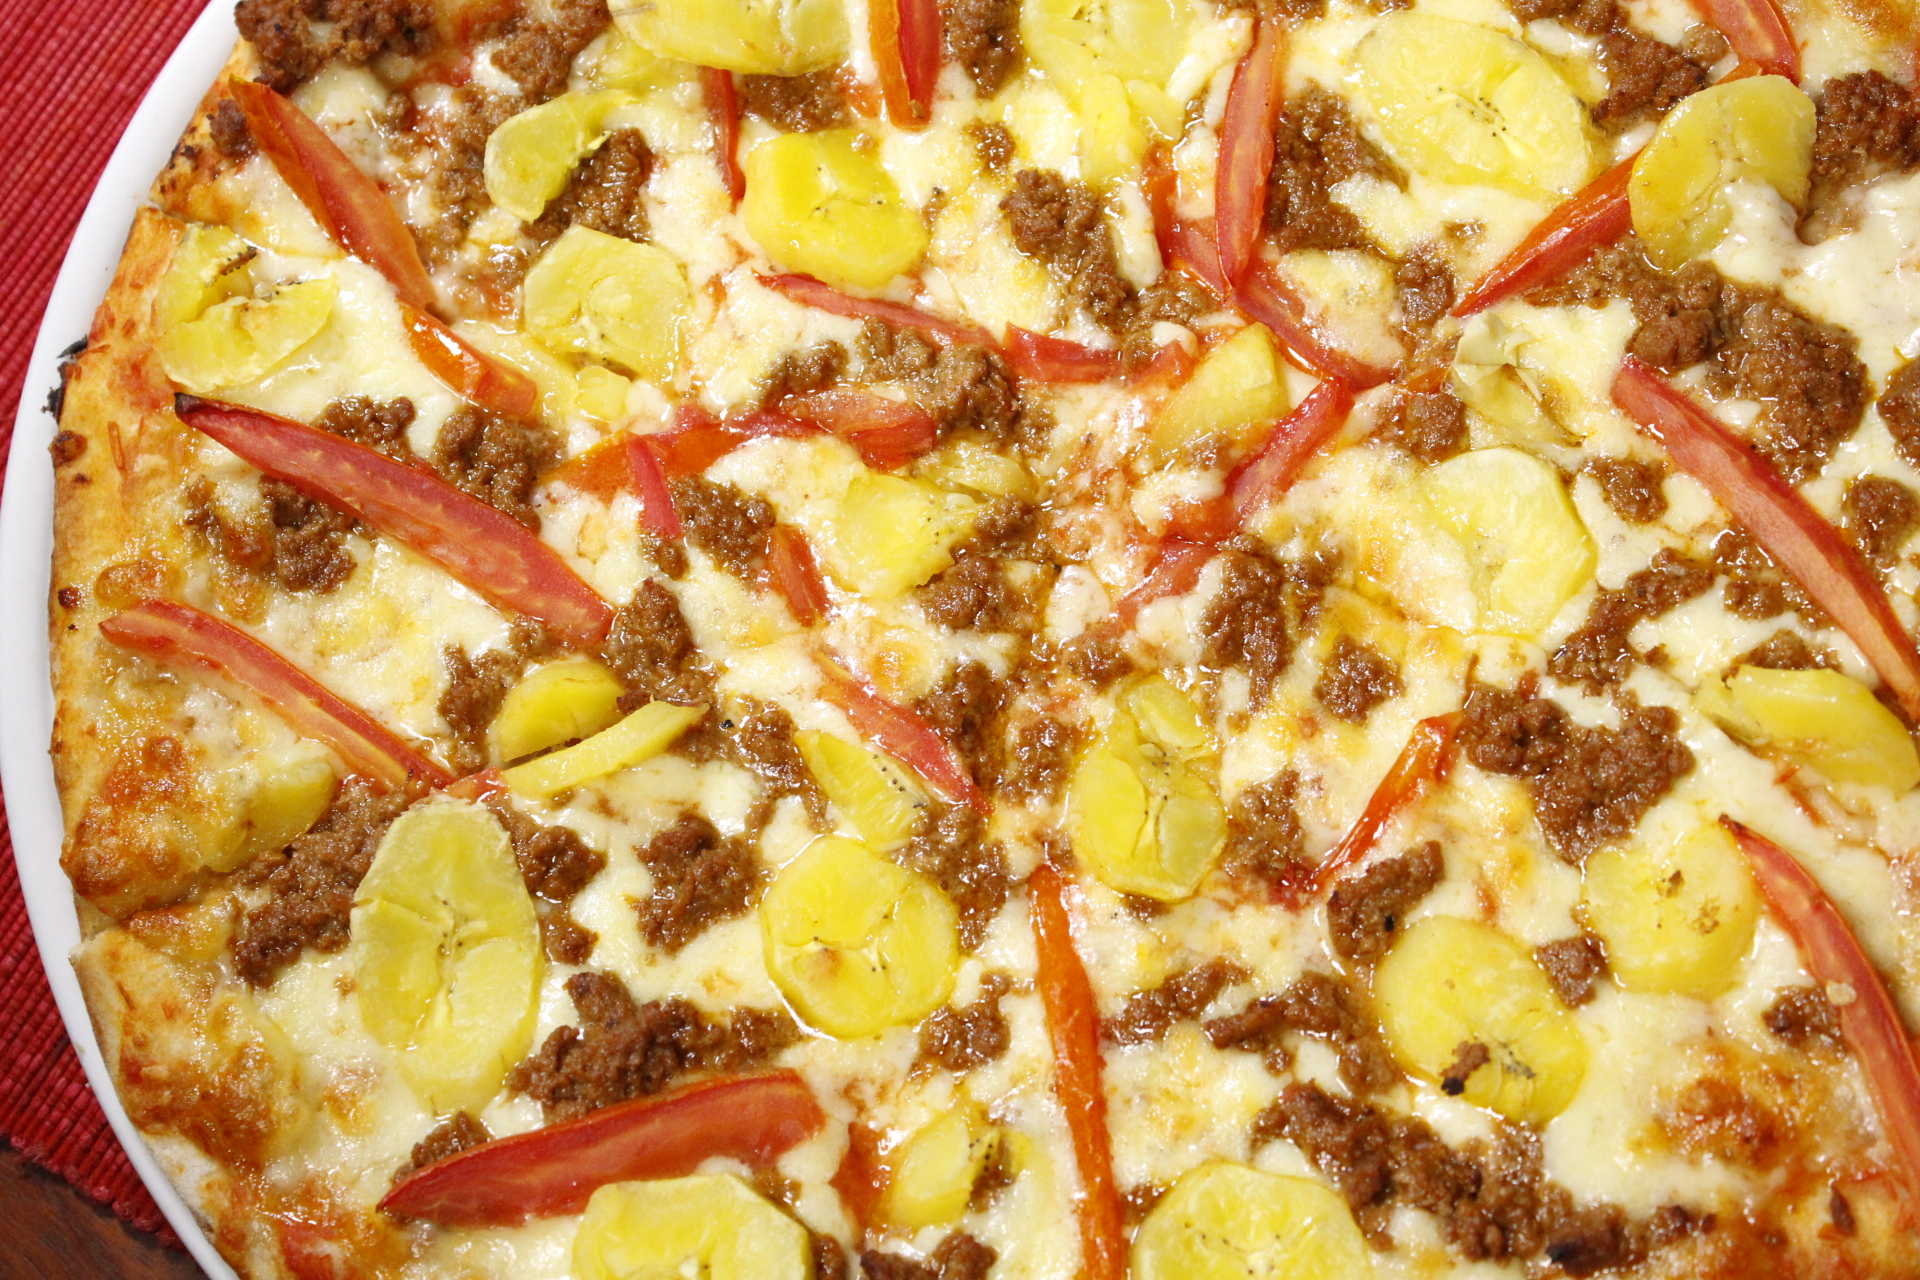 A closer view of the Matooke pizza